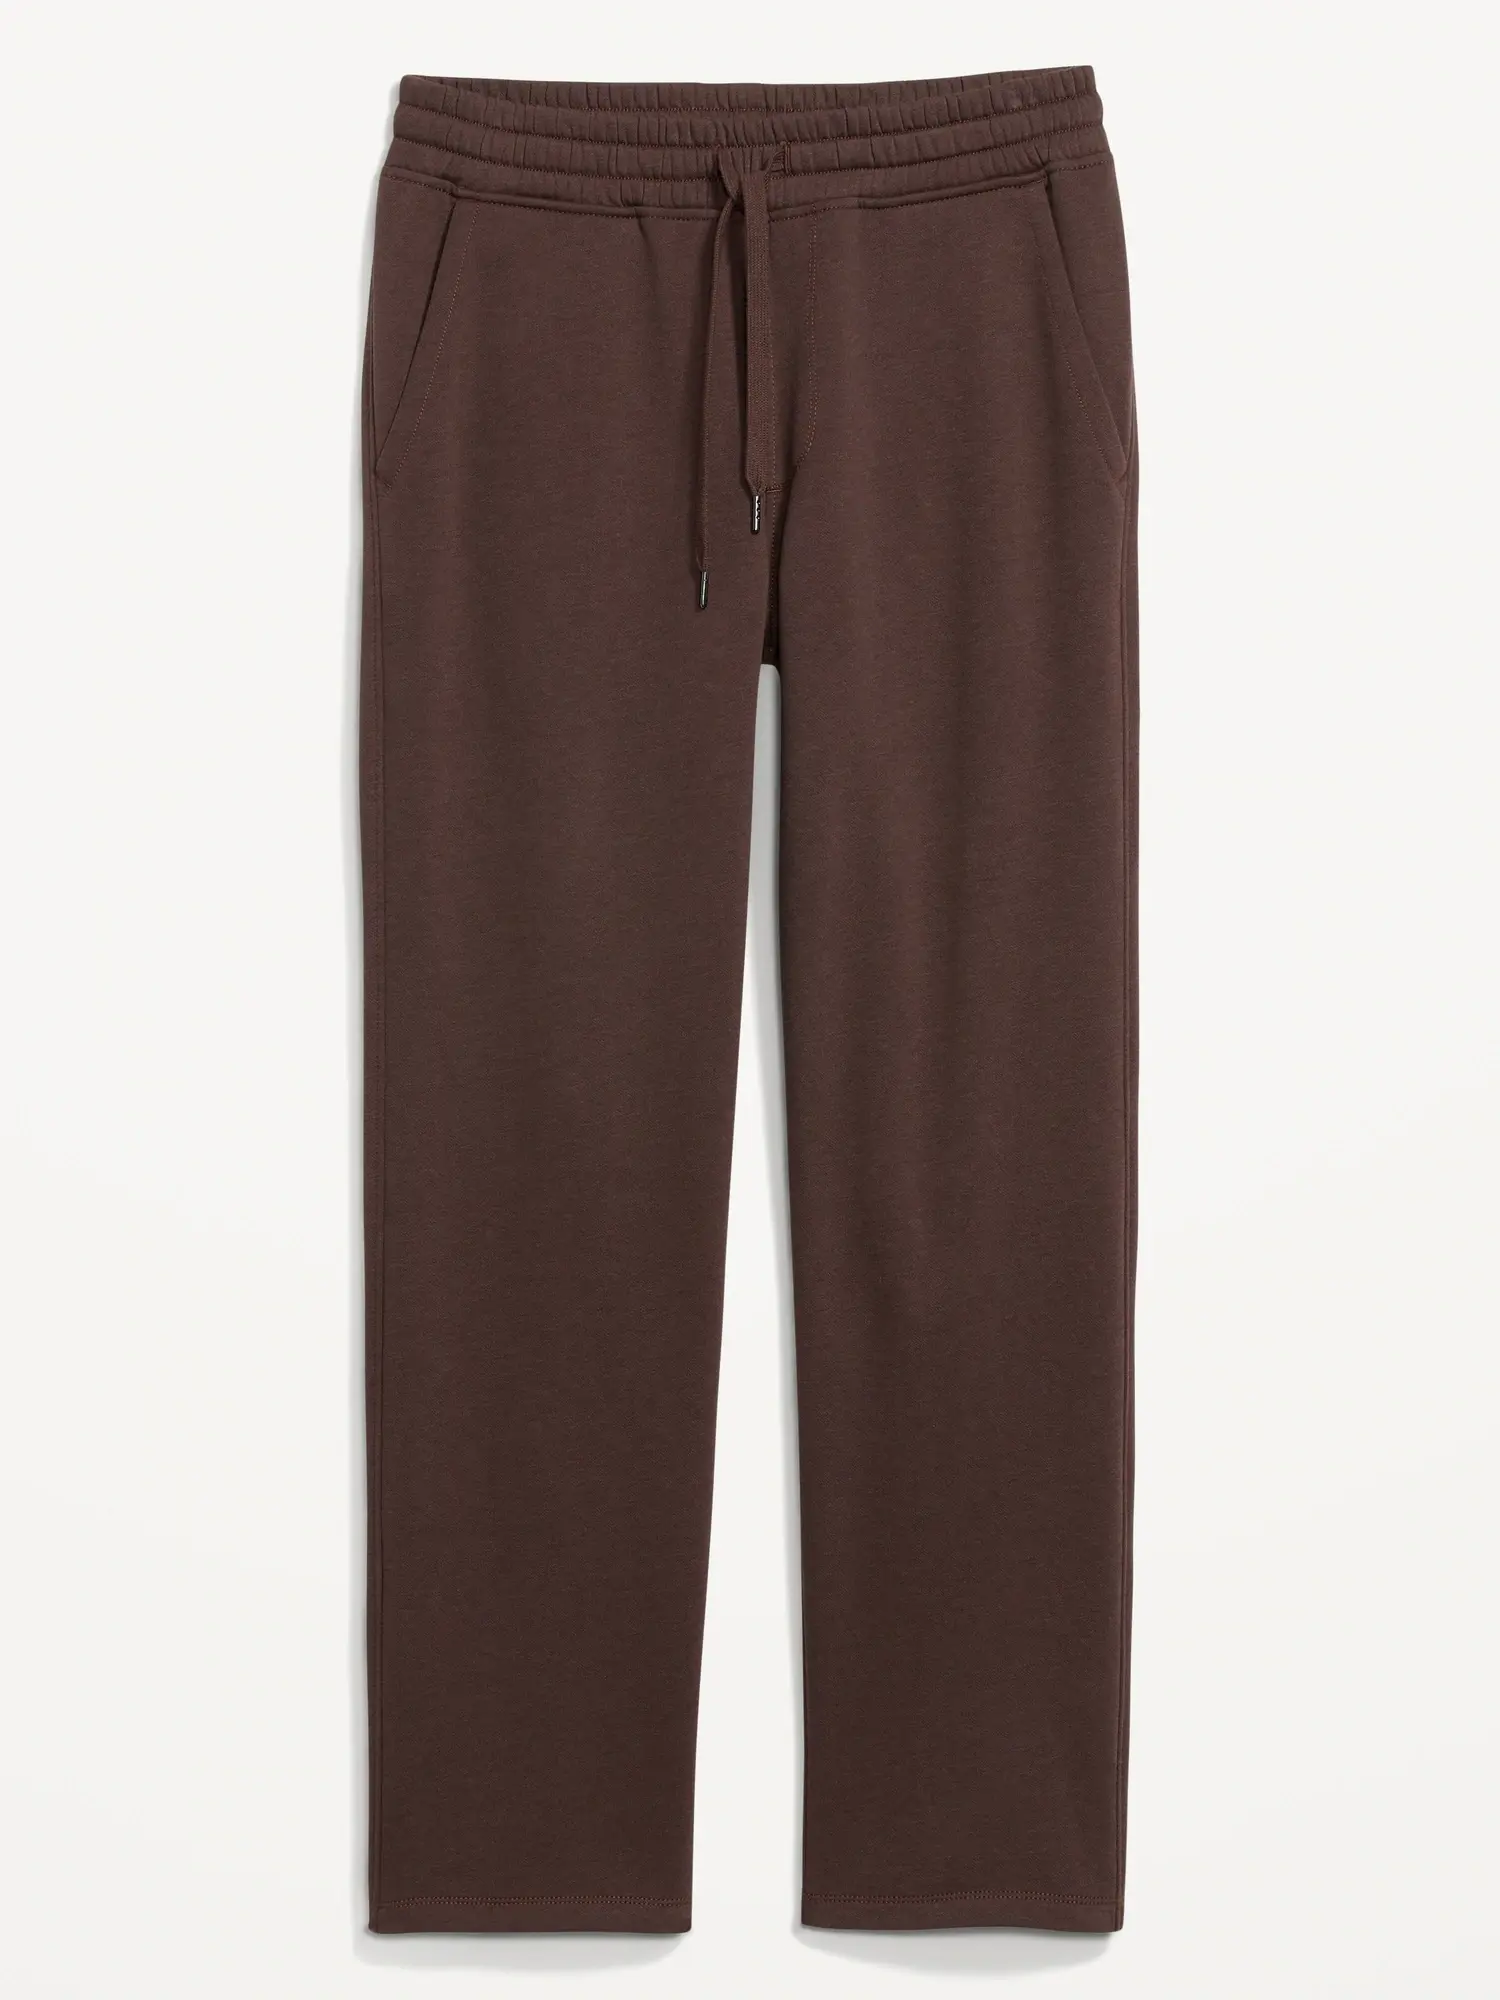 Old Navy Straight Sweatpants for Men brown. 1